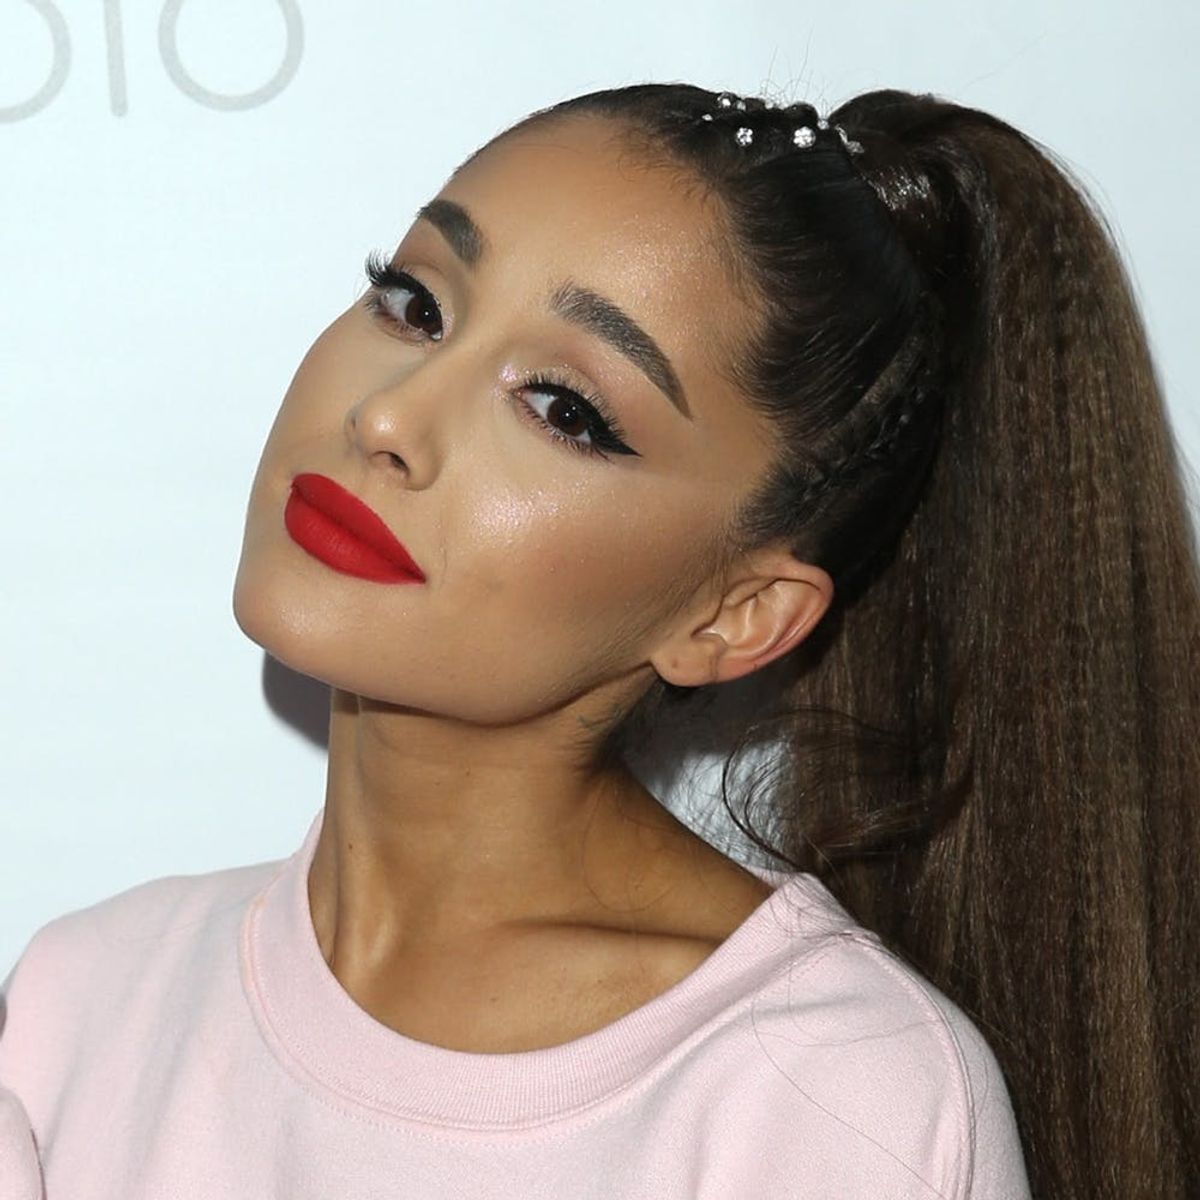 Is Ariana Grande Sporting a Tribute Tattoo for Pete Davidson’s Late Father?